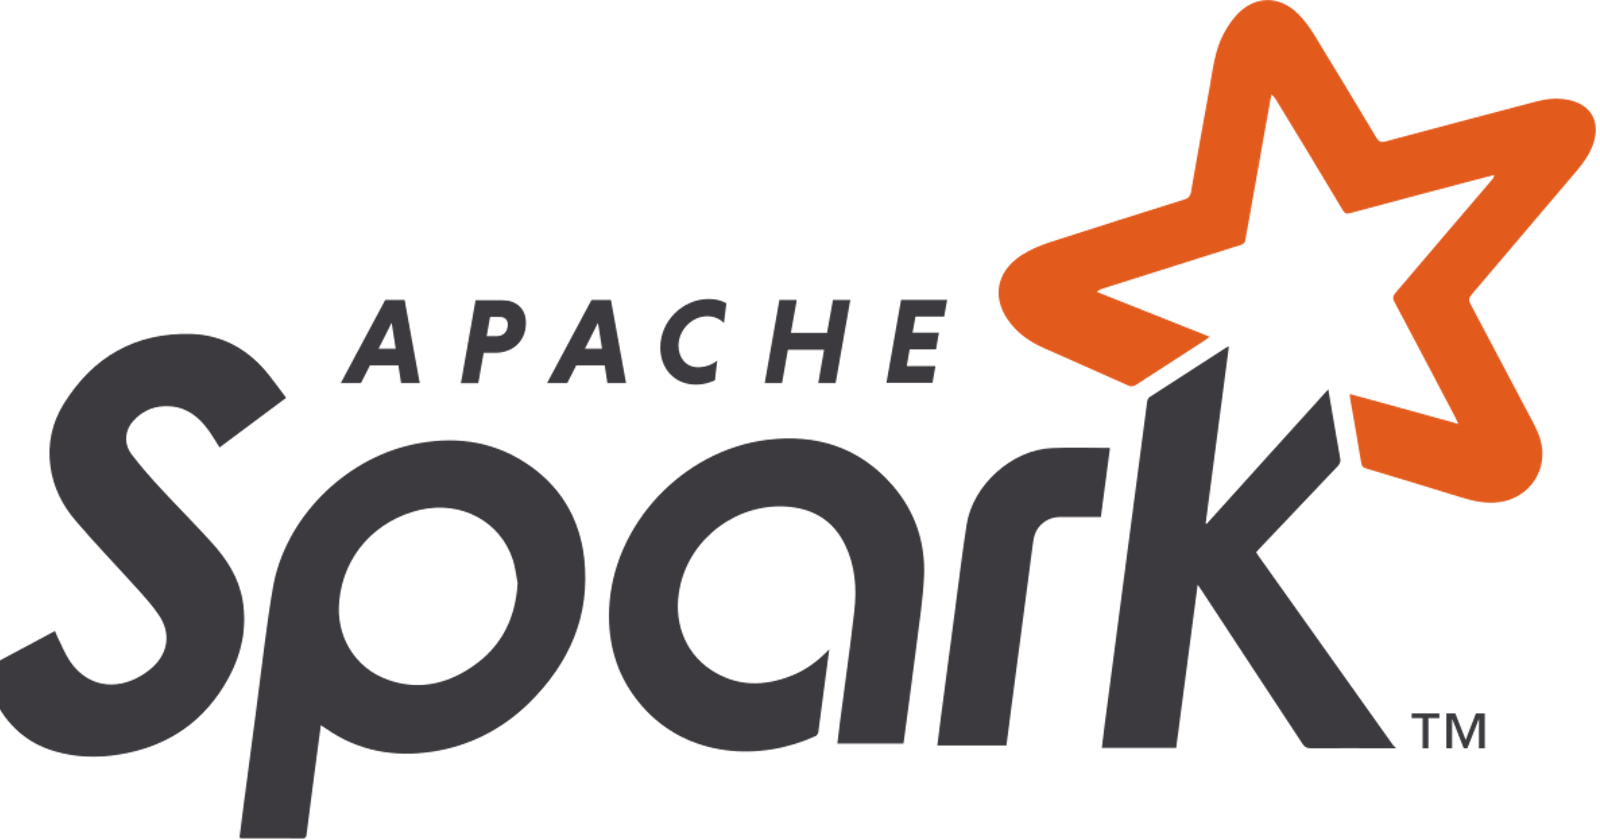 Getting Started with Apache Spark